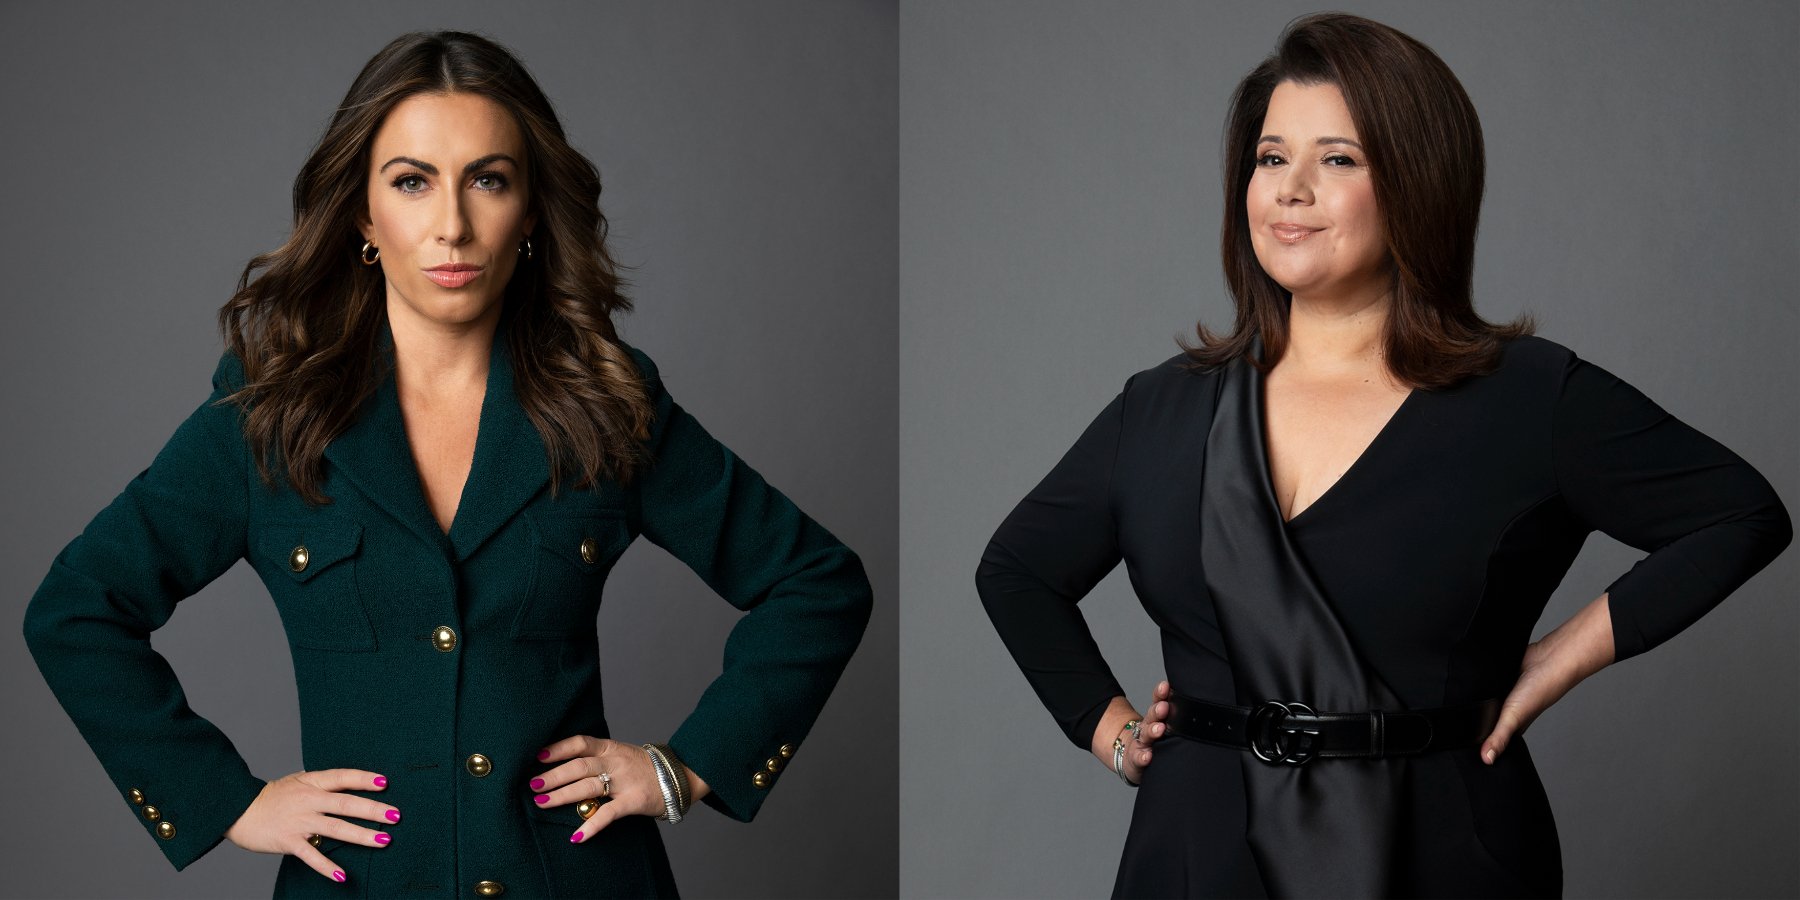 Alyssa Farah Griffin and Ana Navarro in separate press photographs for ABC's 'The View.'